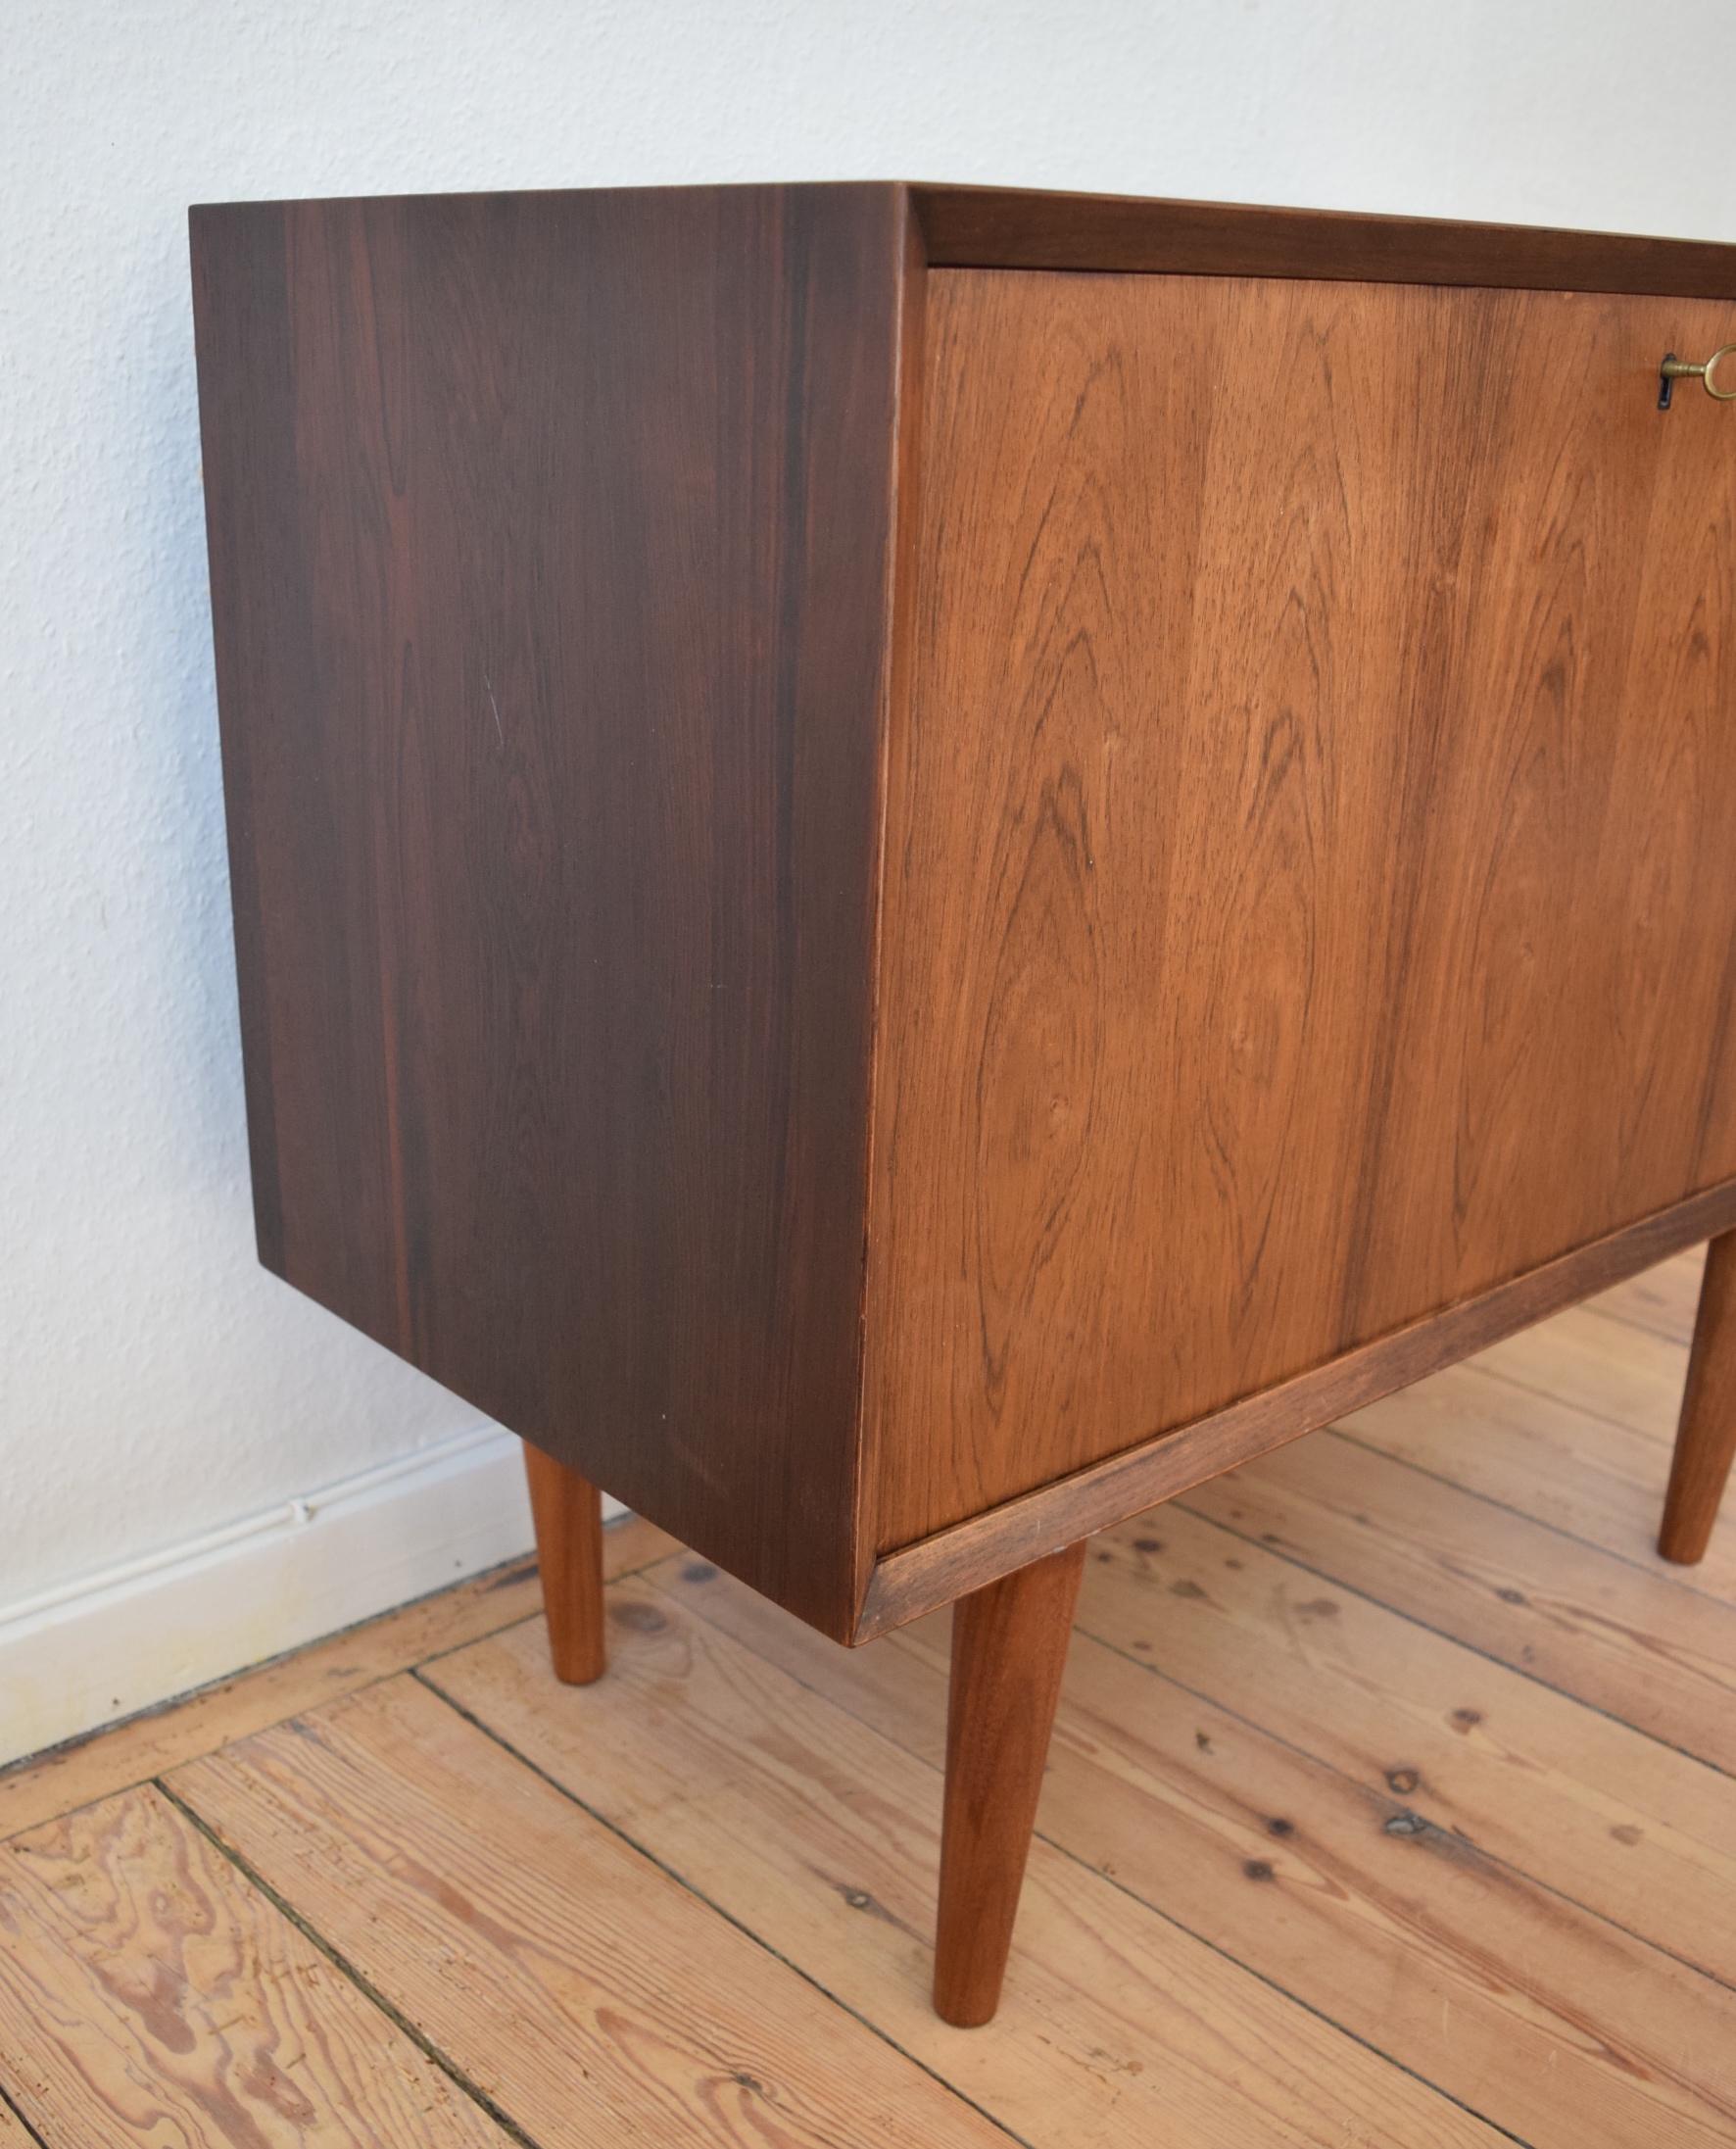 Modernist Brazilian rosewood Poul Cadovius CADO bar cabinet with fold-down door 
Designed by Poul Cadovius - Produced by System CADO - Model CADO - Year of design 1965

Very elegant and practical rosewood cabinet with fold-down door. Features